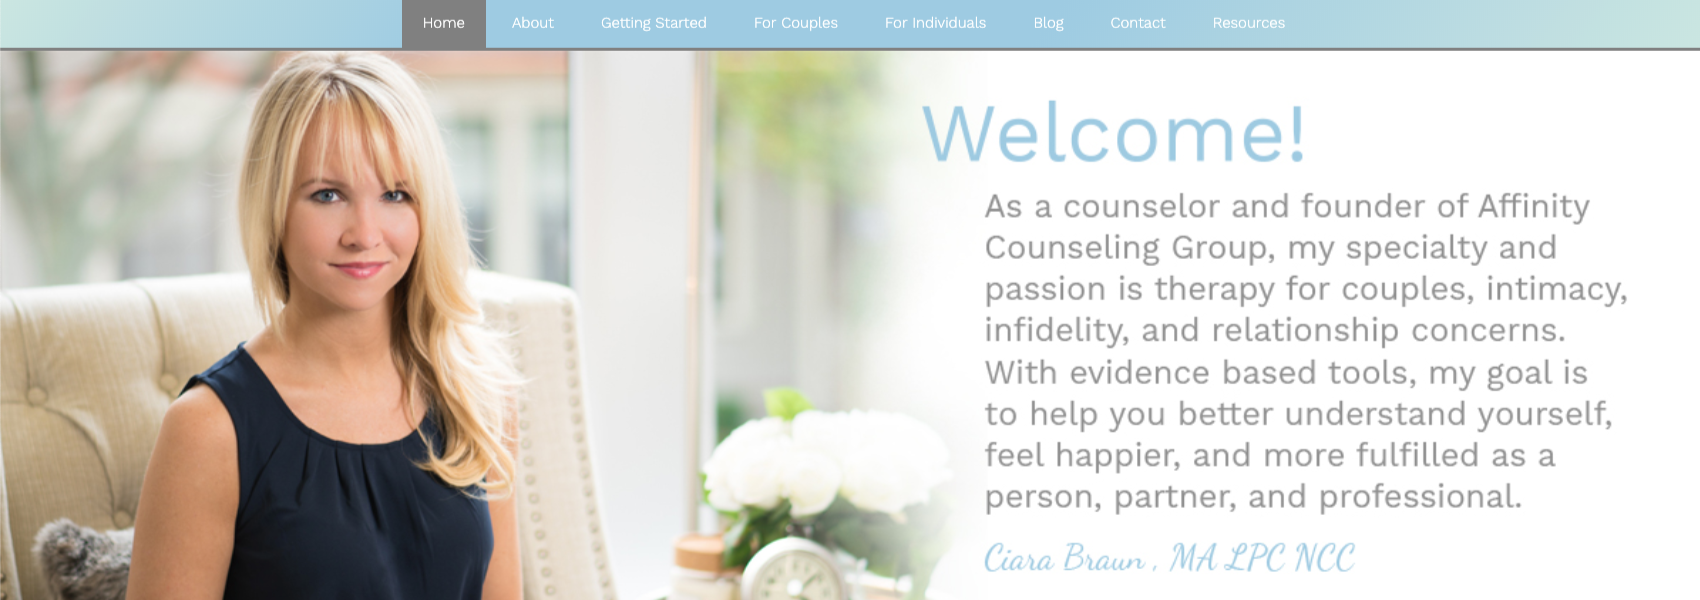 Therapist Home page example | The Top 5 Things Every Therapist Website Needs | Brighter Vision Web Solutions | Marketing Blog for Therapists